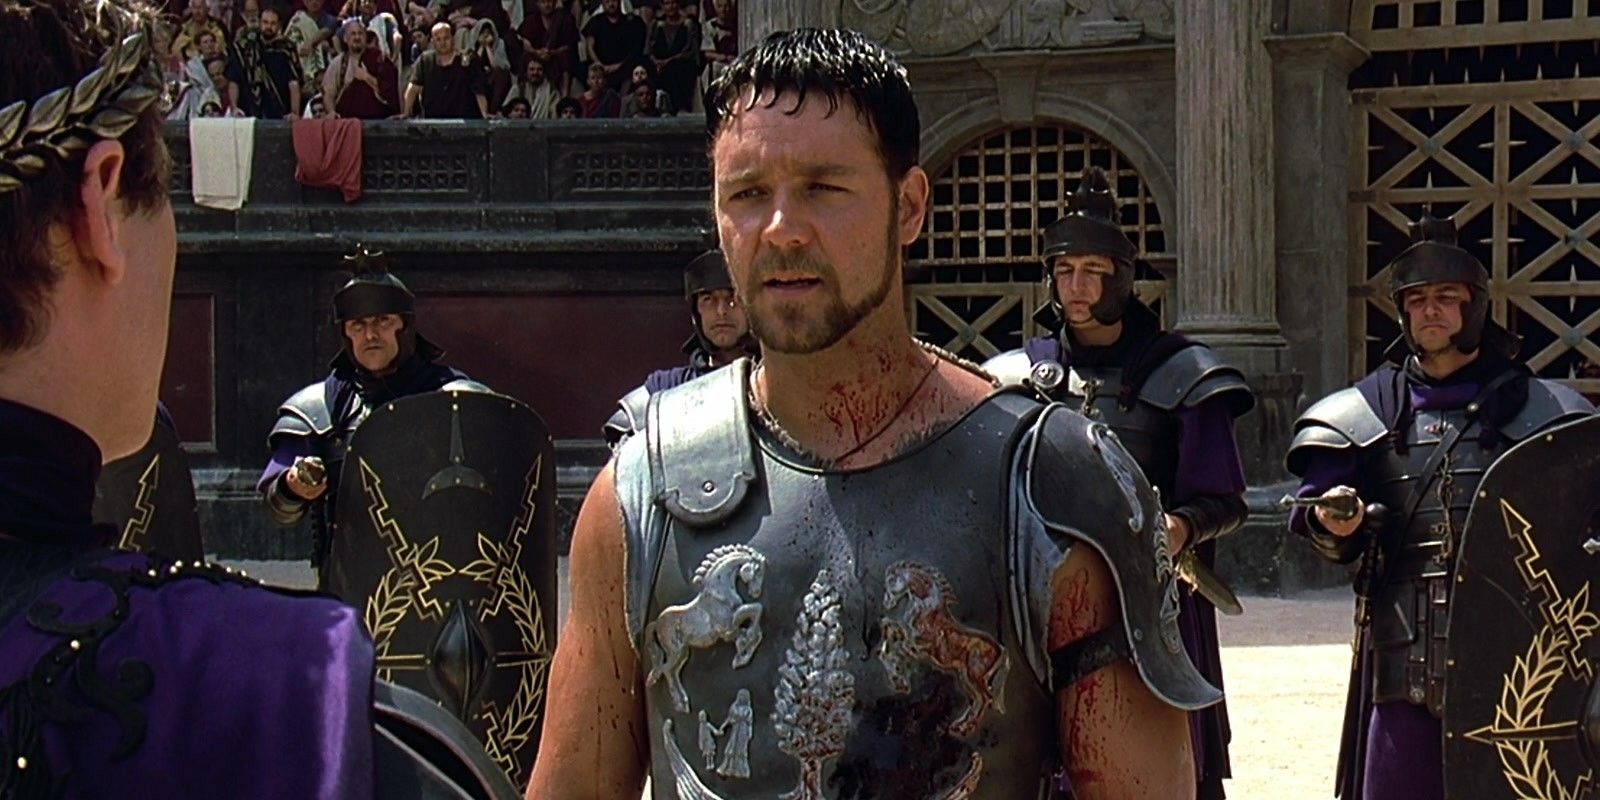 Maximus speaks to the King in Gladiator